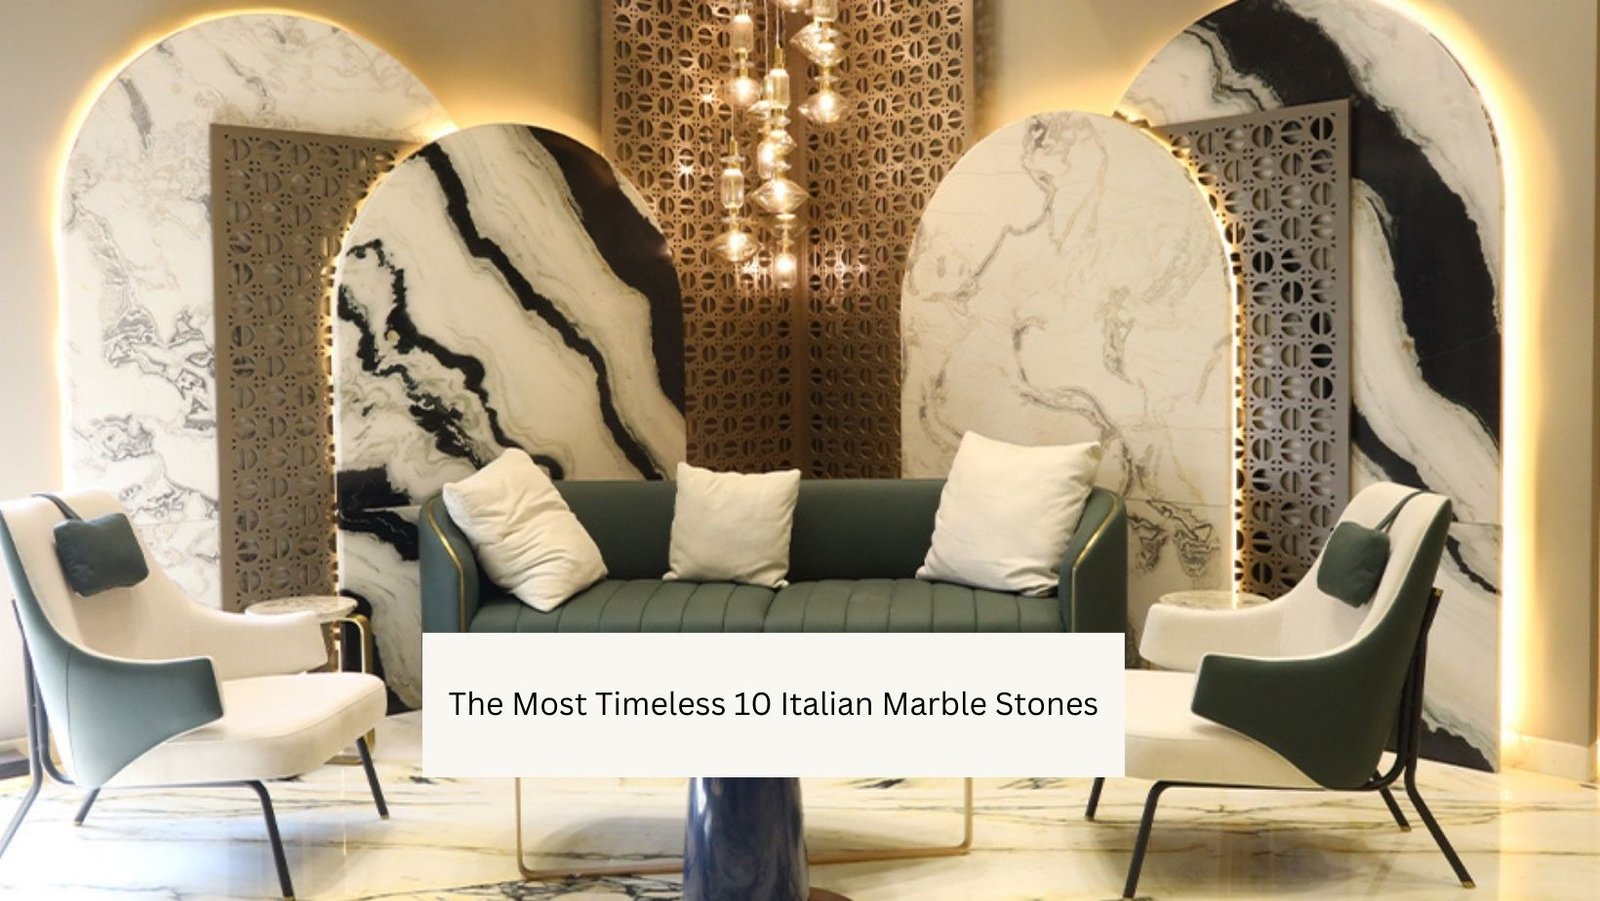 What Are the Most Timeless 10 Italian Marble Stones